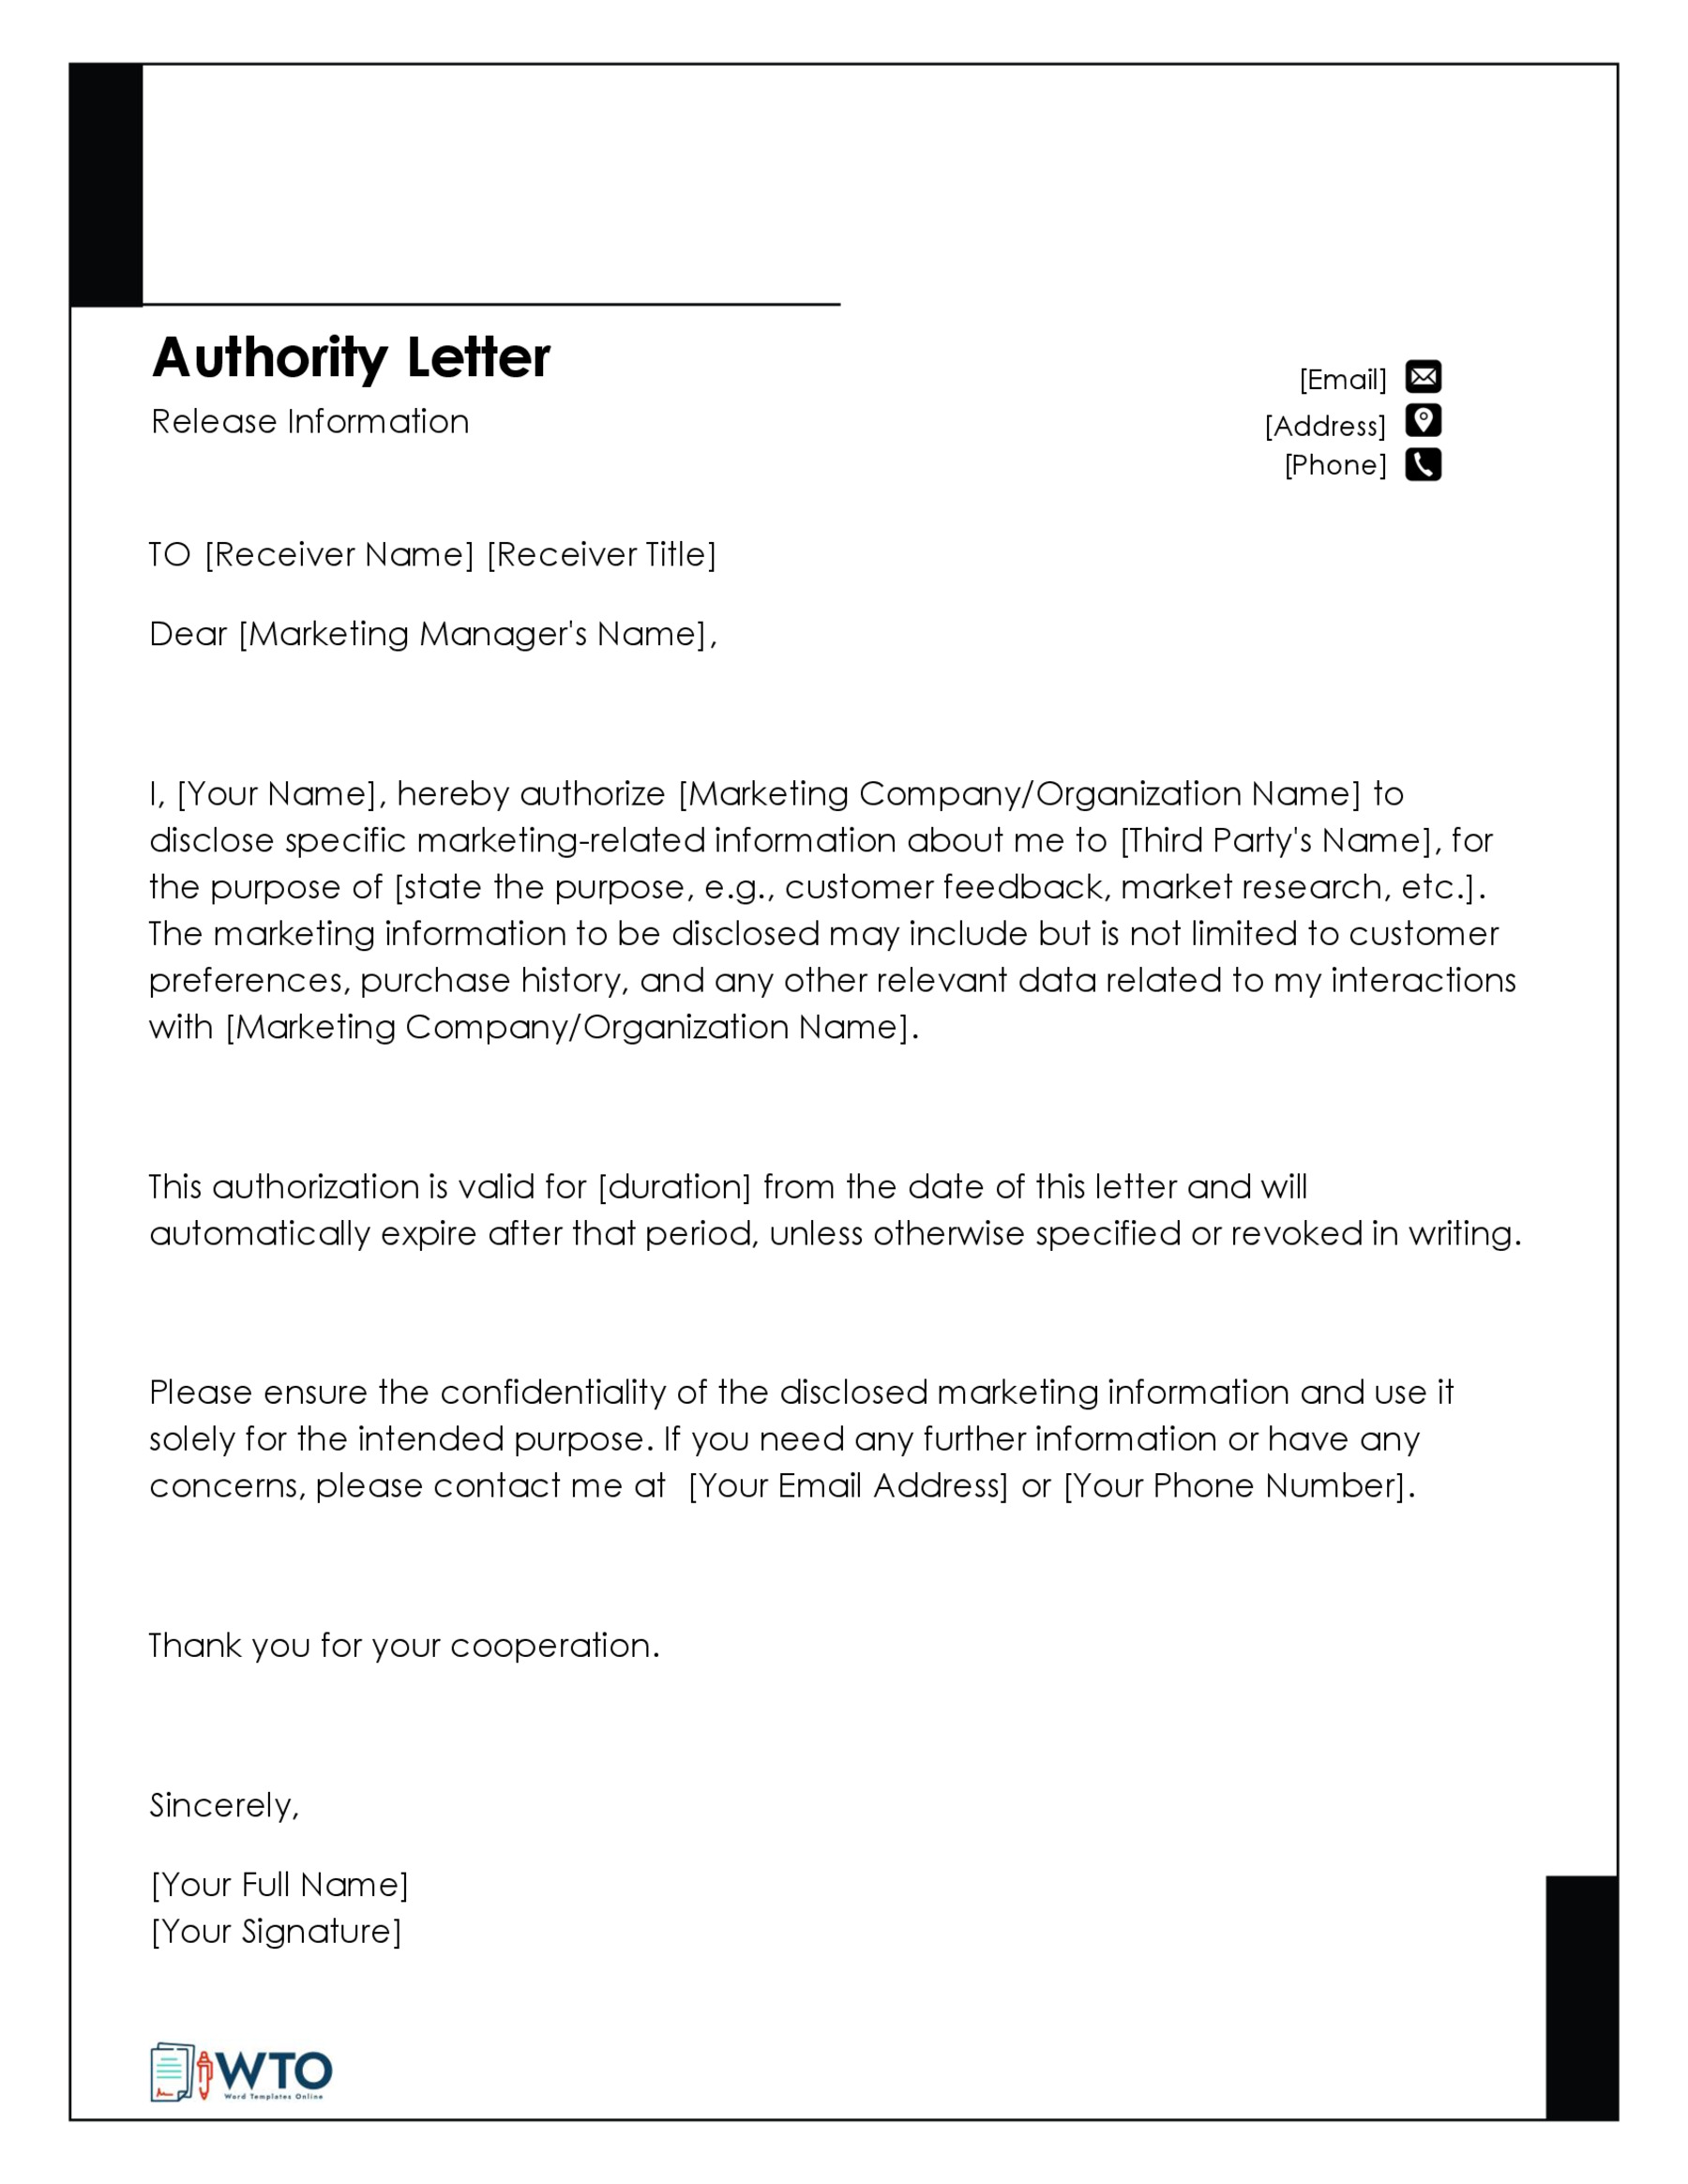 Authorization Letter to Release Information Template-Free in Ms Word